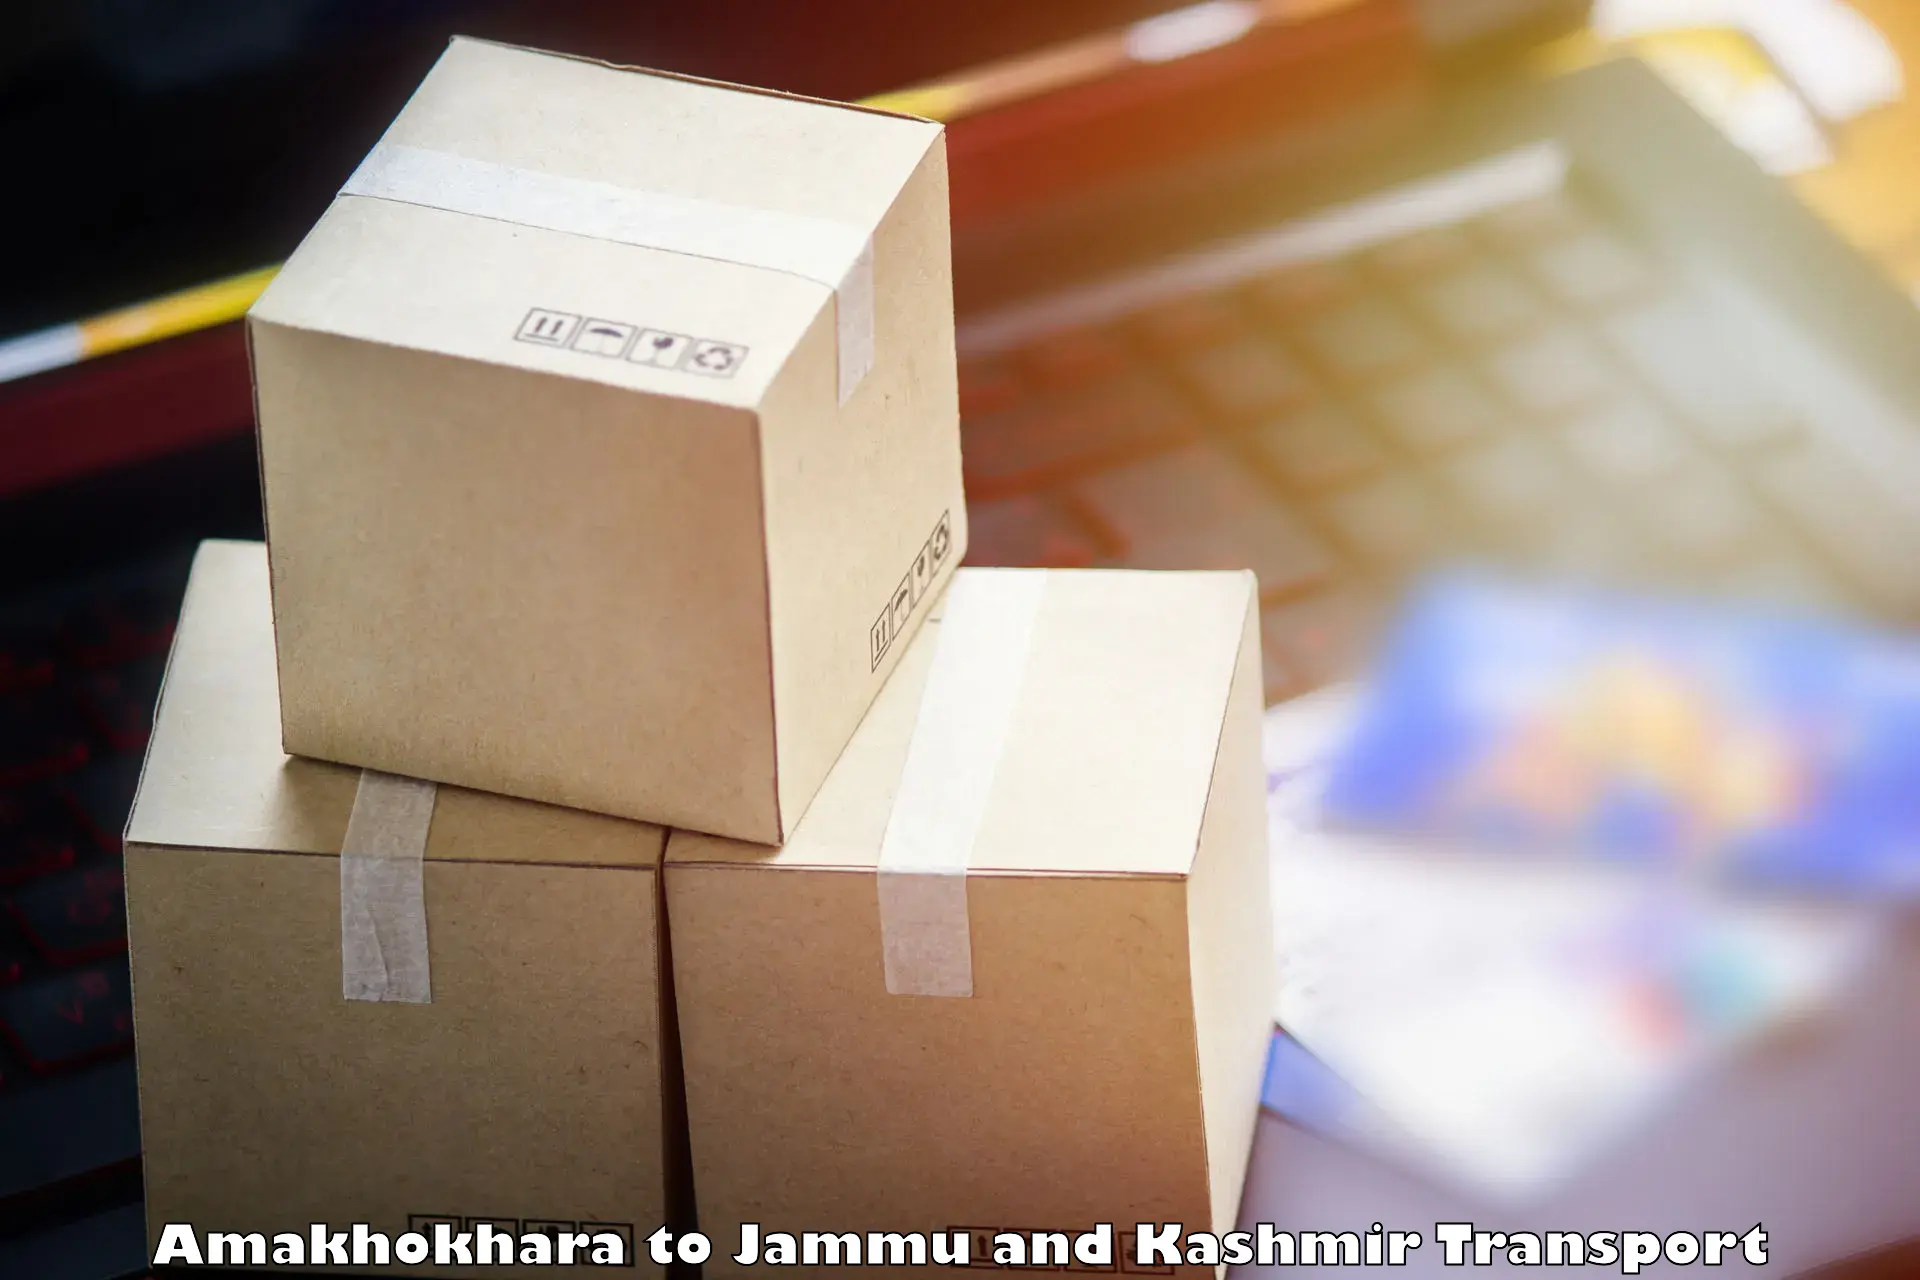 Parcel transport services in Amakhokhara to Doda